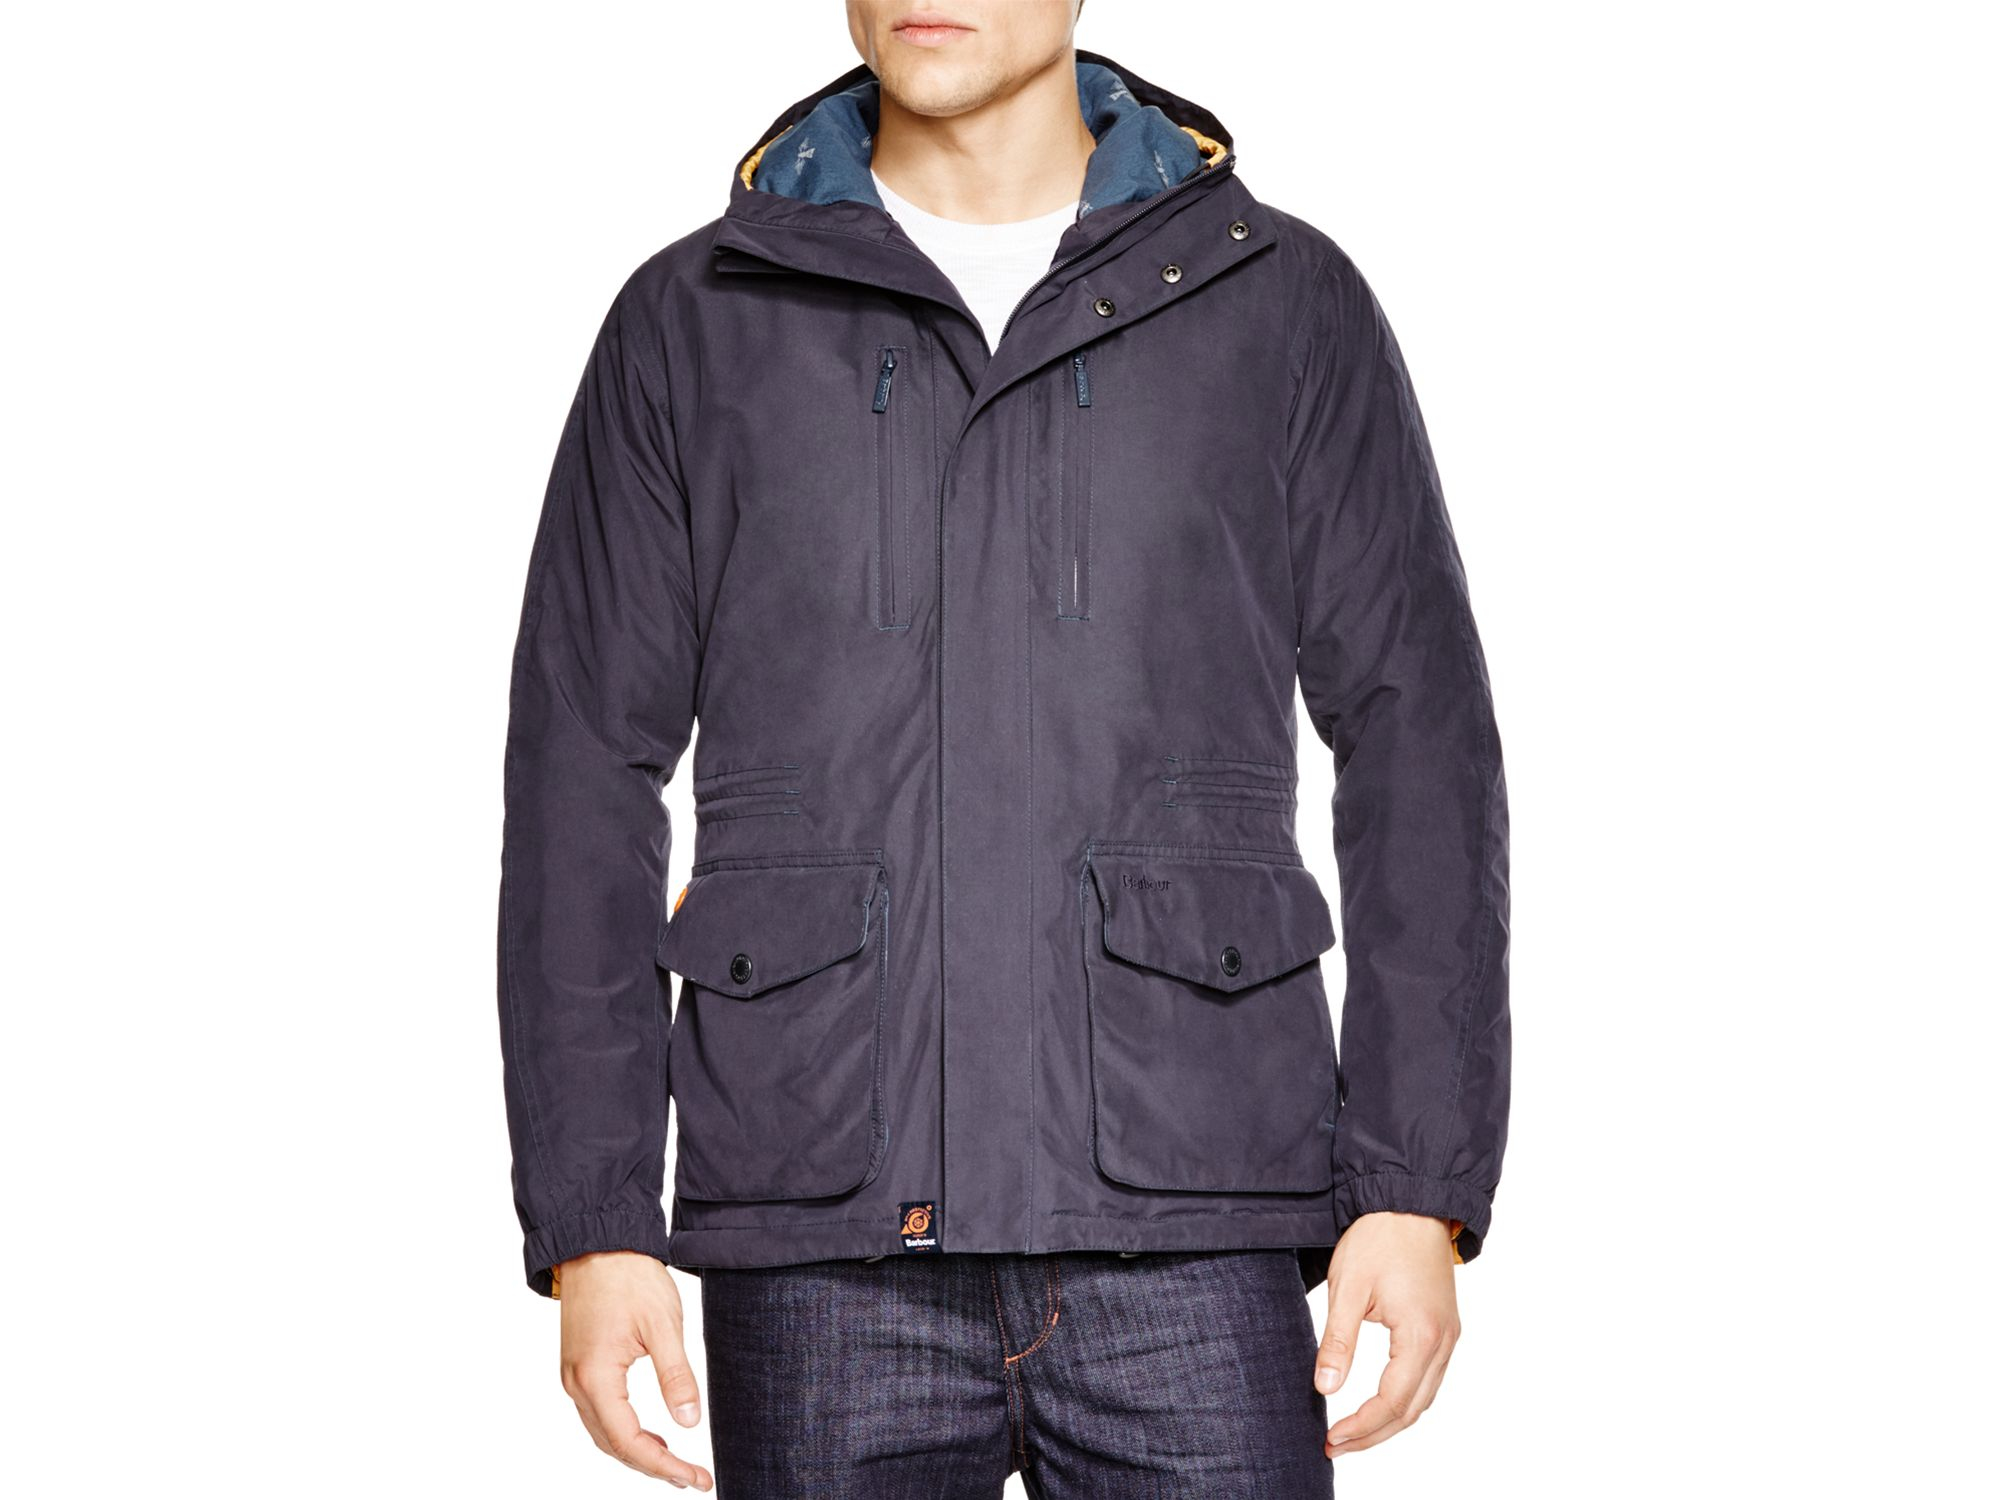 Barbour Synthetic Morley Jacket in Navy 